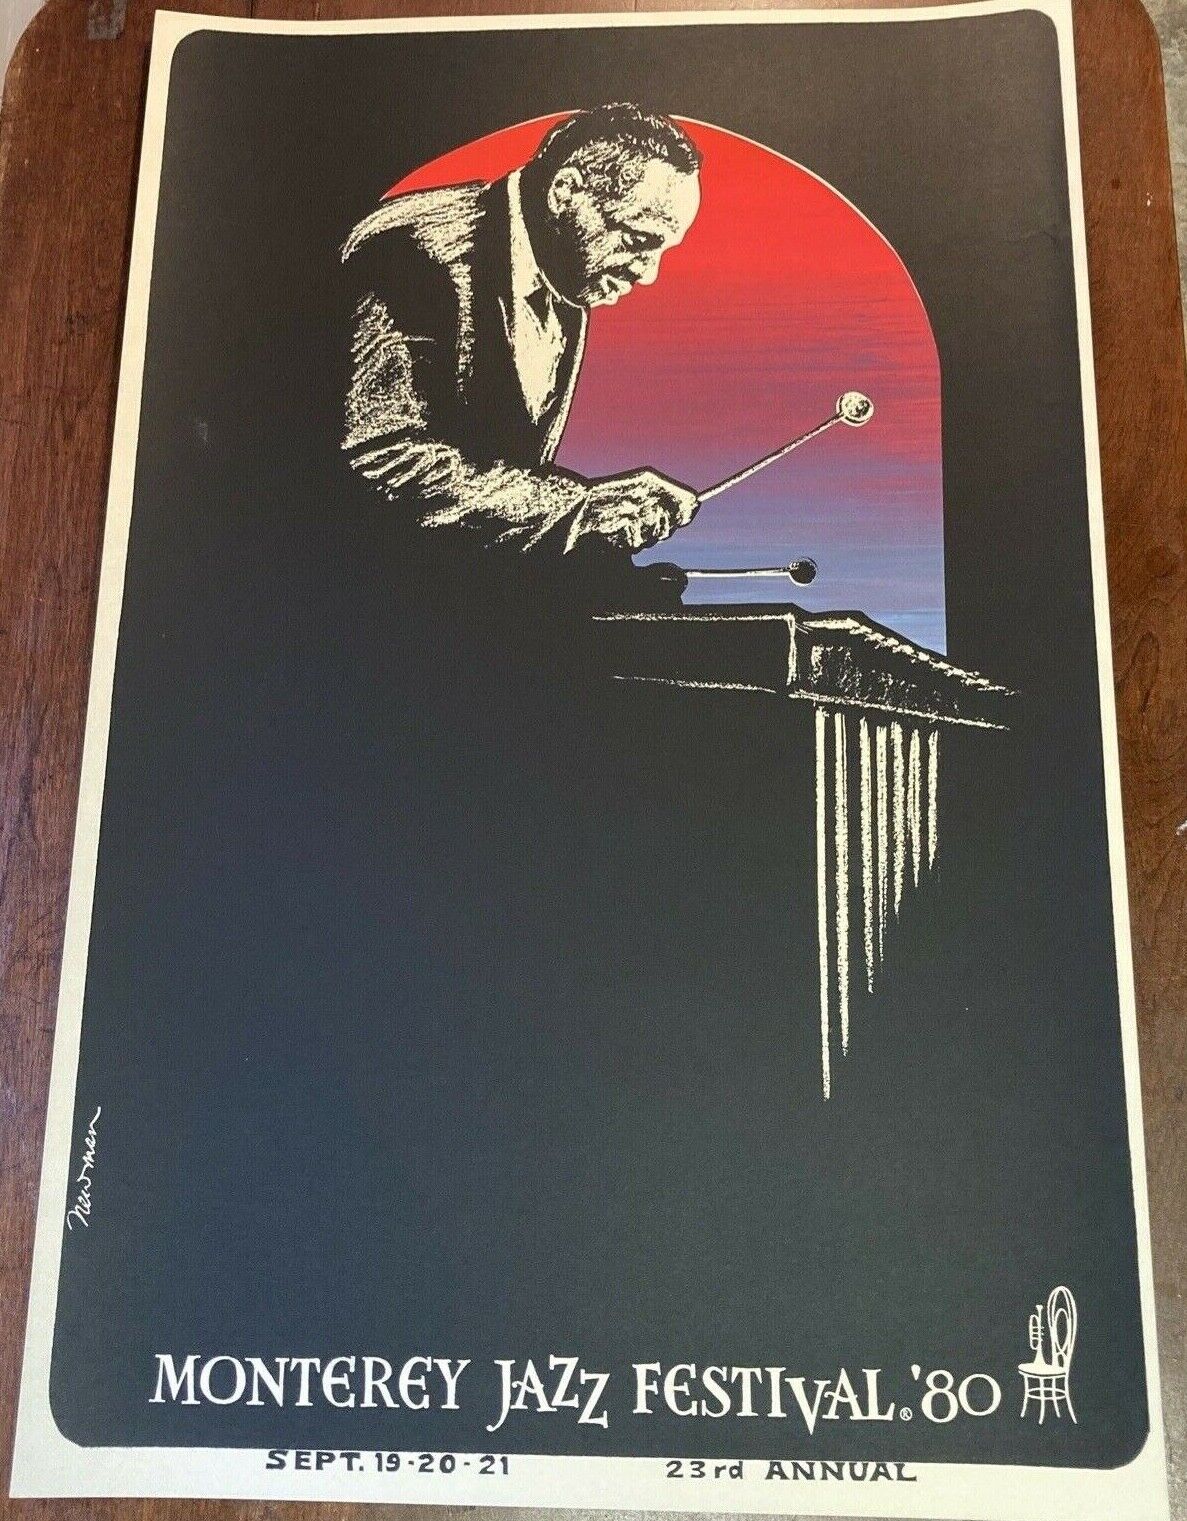 Monterrey Jazz Festival Poster Fresno Mall Mail order of Lionell Earl 1980 by Hampton N